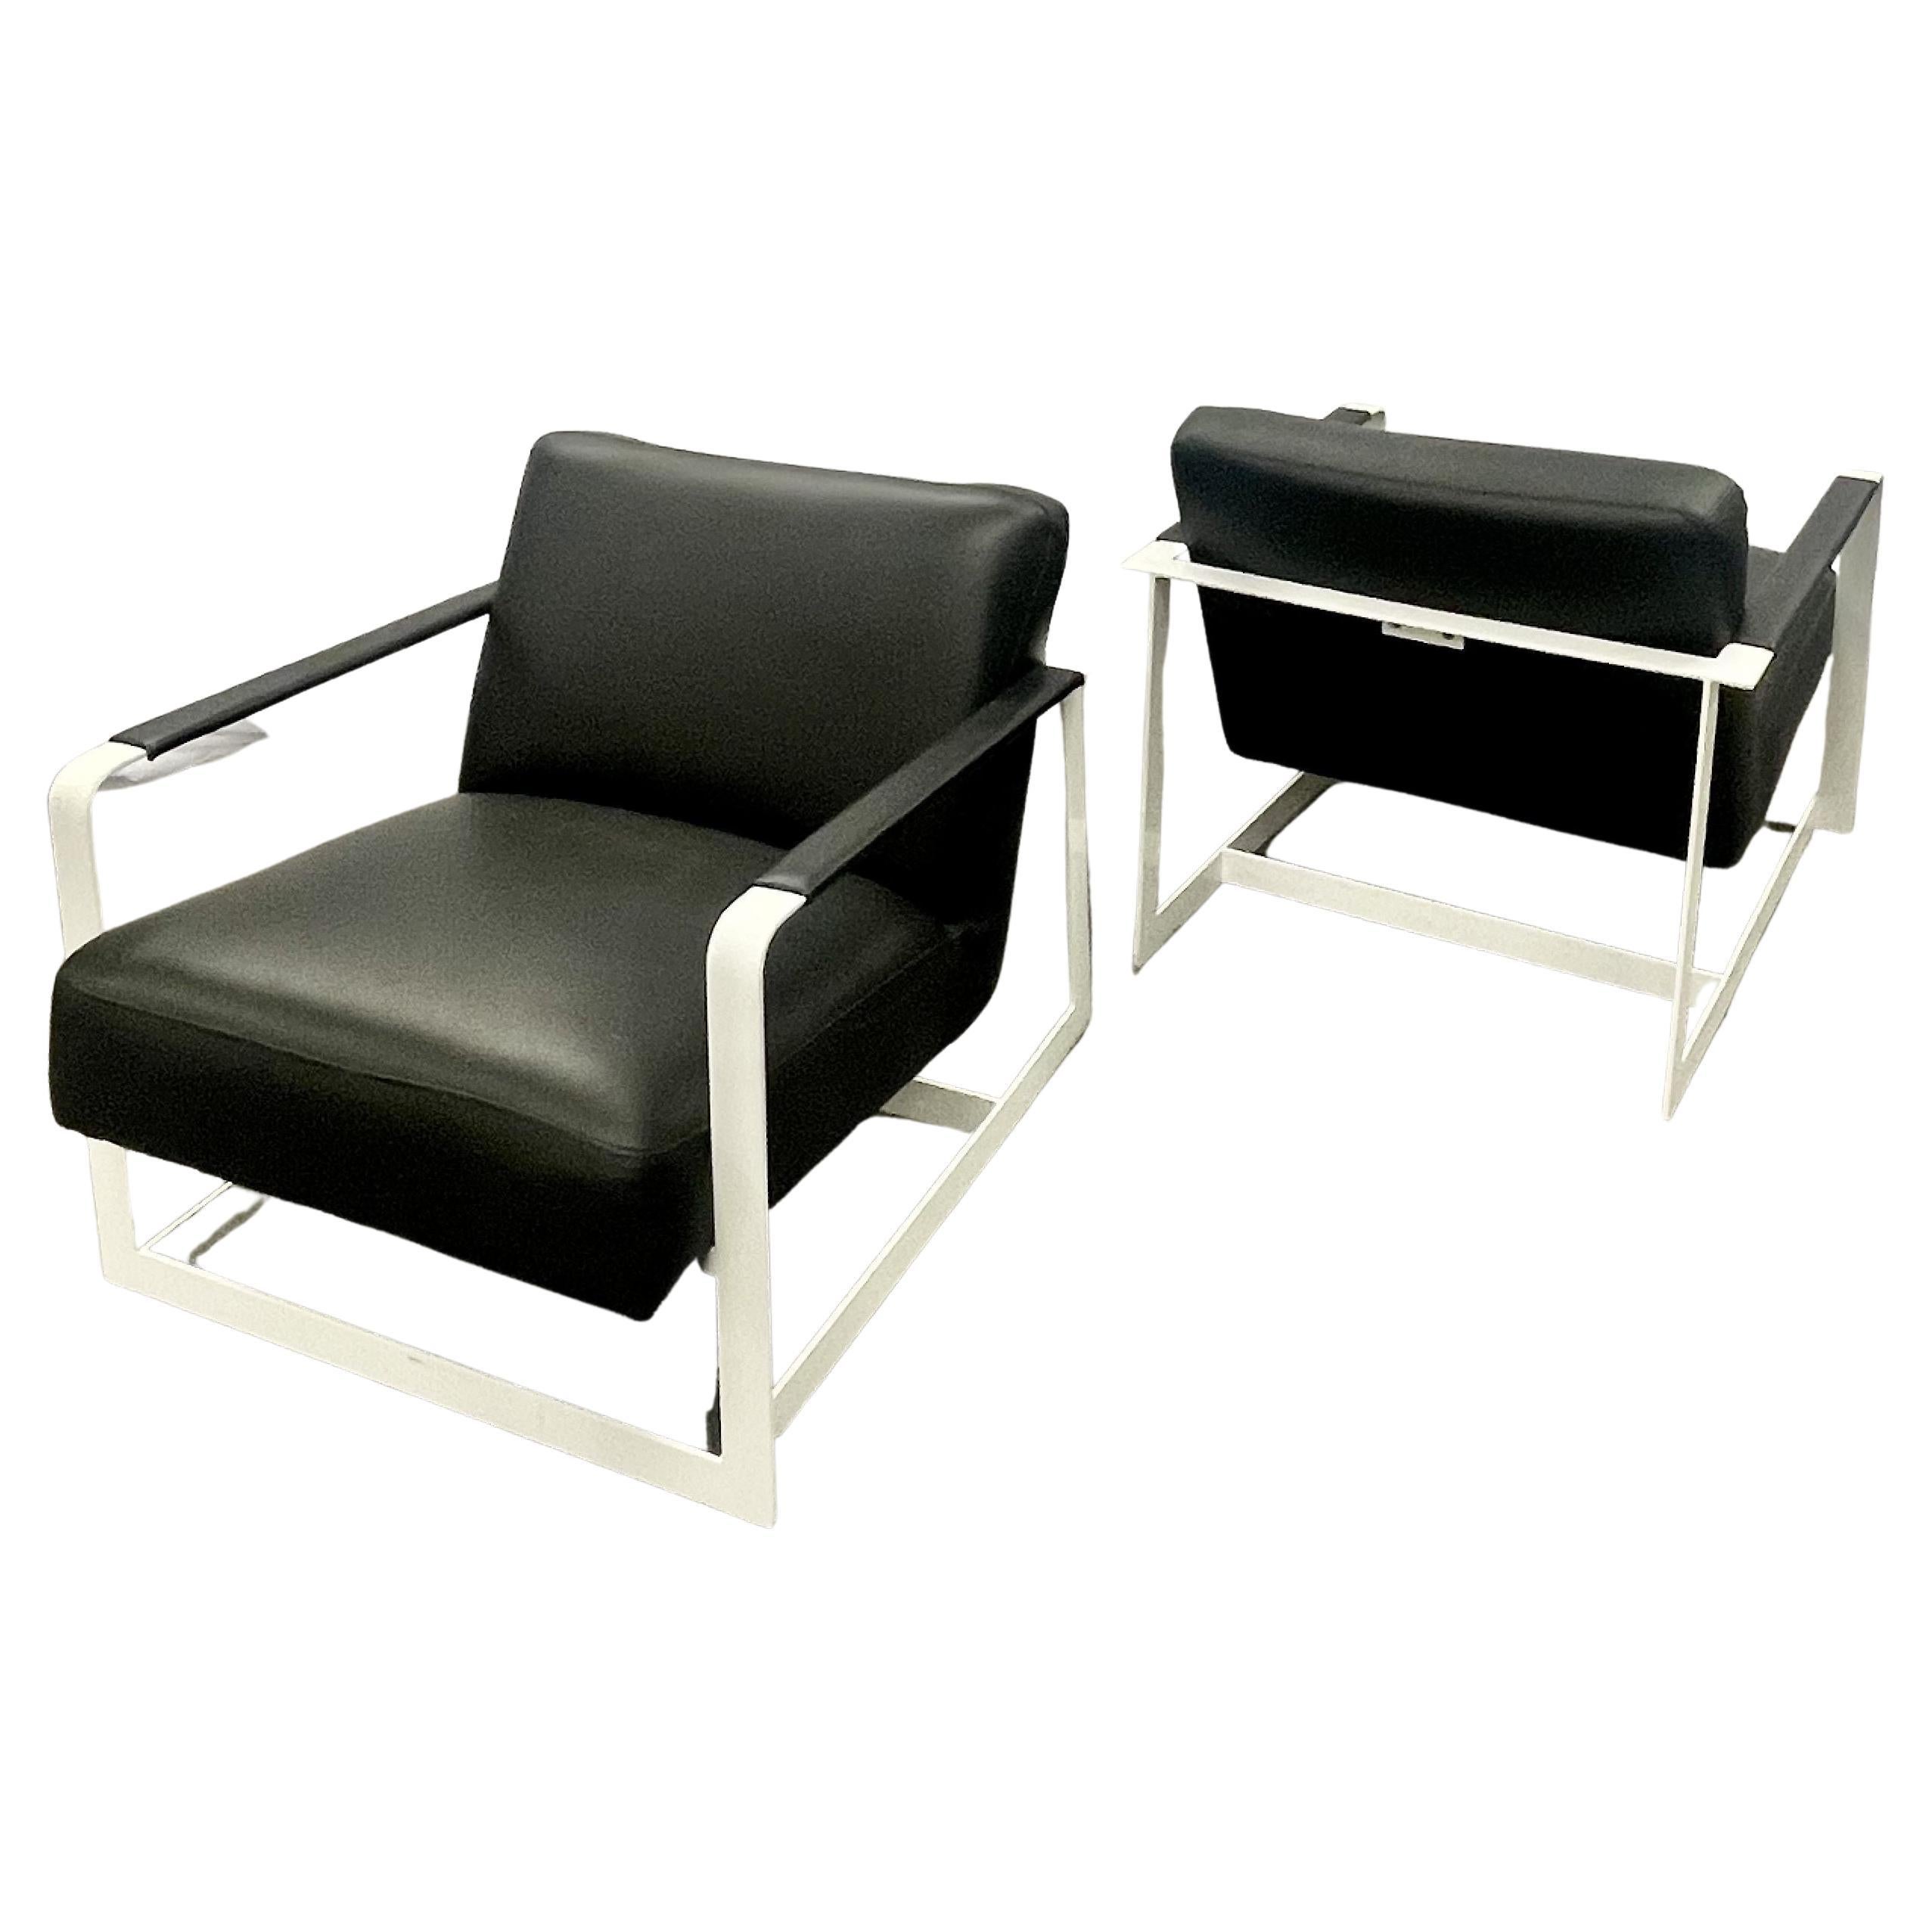 Pair of Mid-Century Modern Lounge Chairs, Leather, Steel Base, American, 1980s For Sale